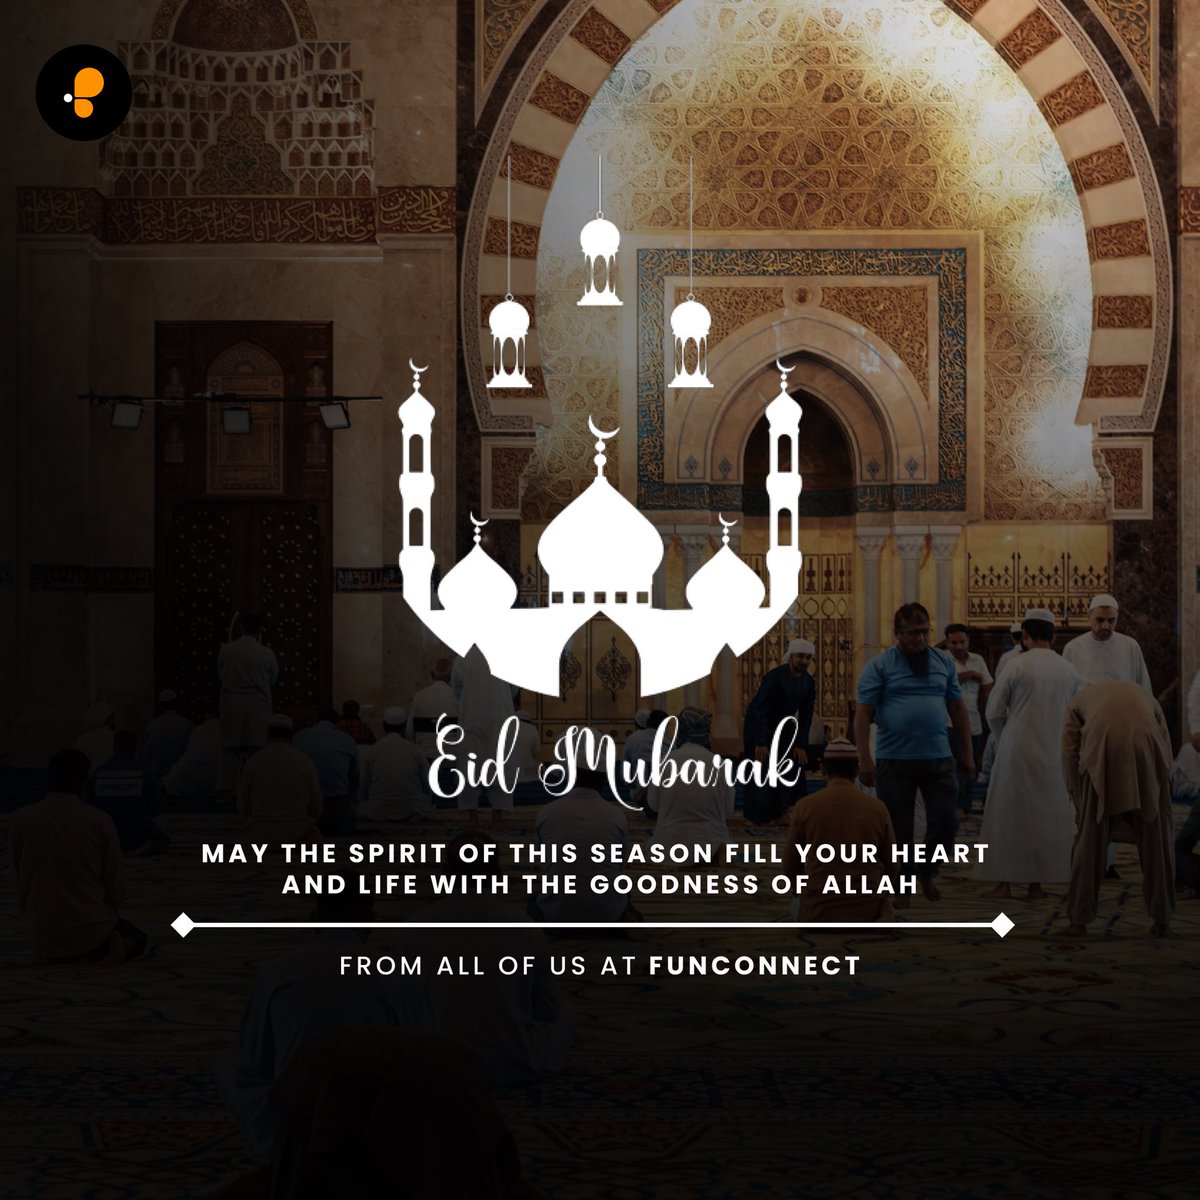 Wishing you a colorful and delightful Eid filled with sweet moments and cherished memories. 

May this Eid bring you closer to your dreams and aspirations. Eid Mubarak 🌙💫

#eidmubarak #eidcelebrations #eidvibes #eidlove #eidblessings #eidfood #eidprayers #funconnect